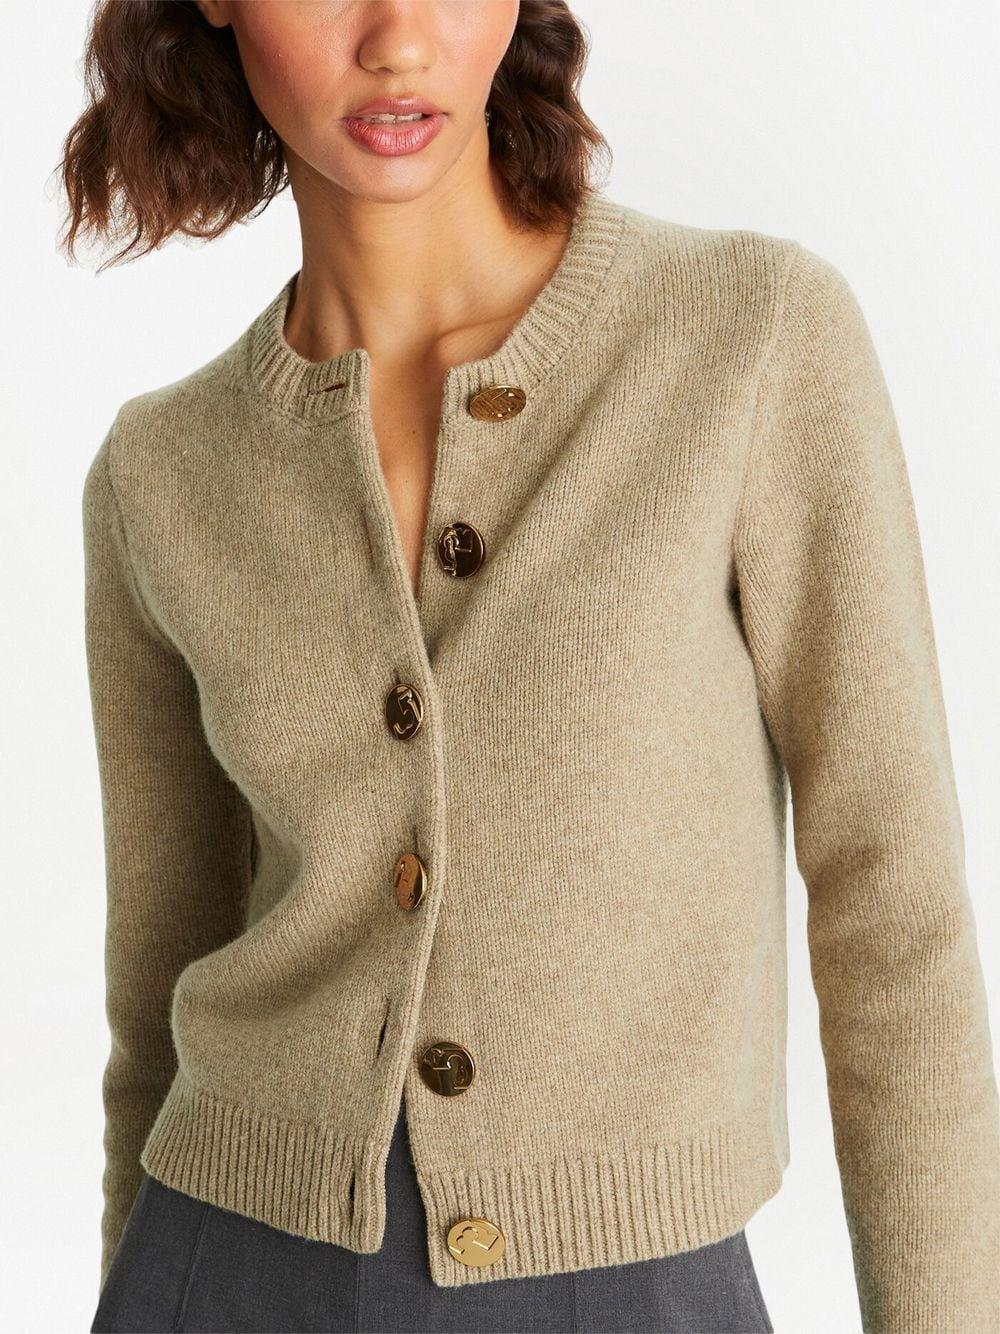 Tory Burch Cotton-linen Fine Knit Cardigan in Natural | Lyst